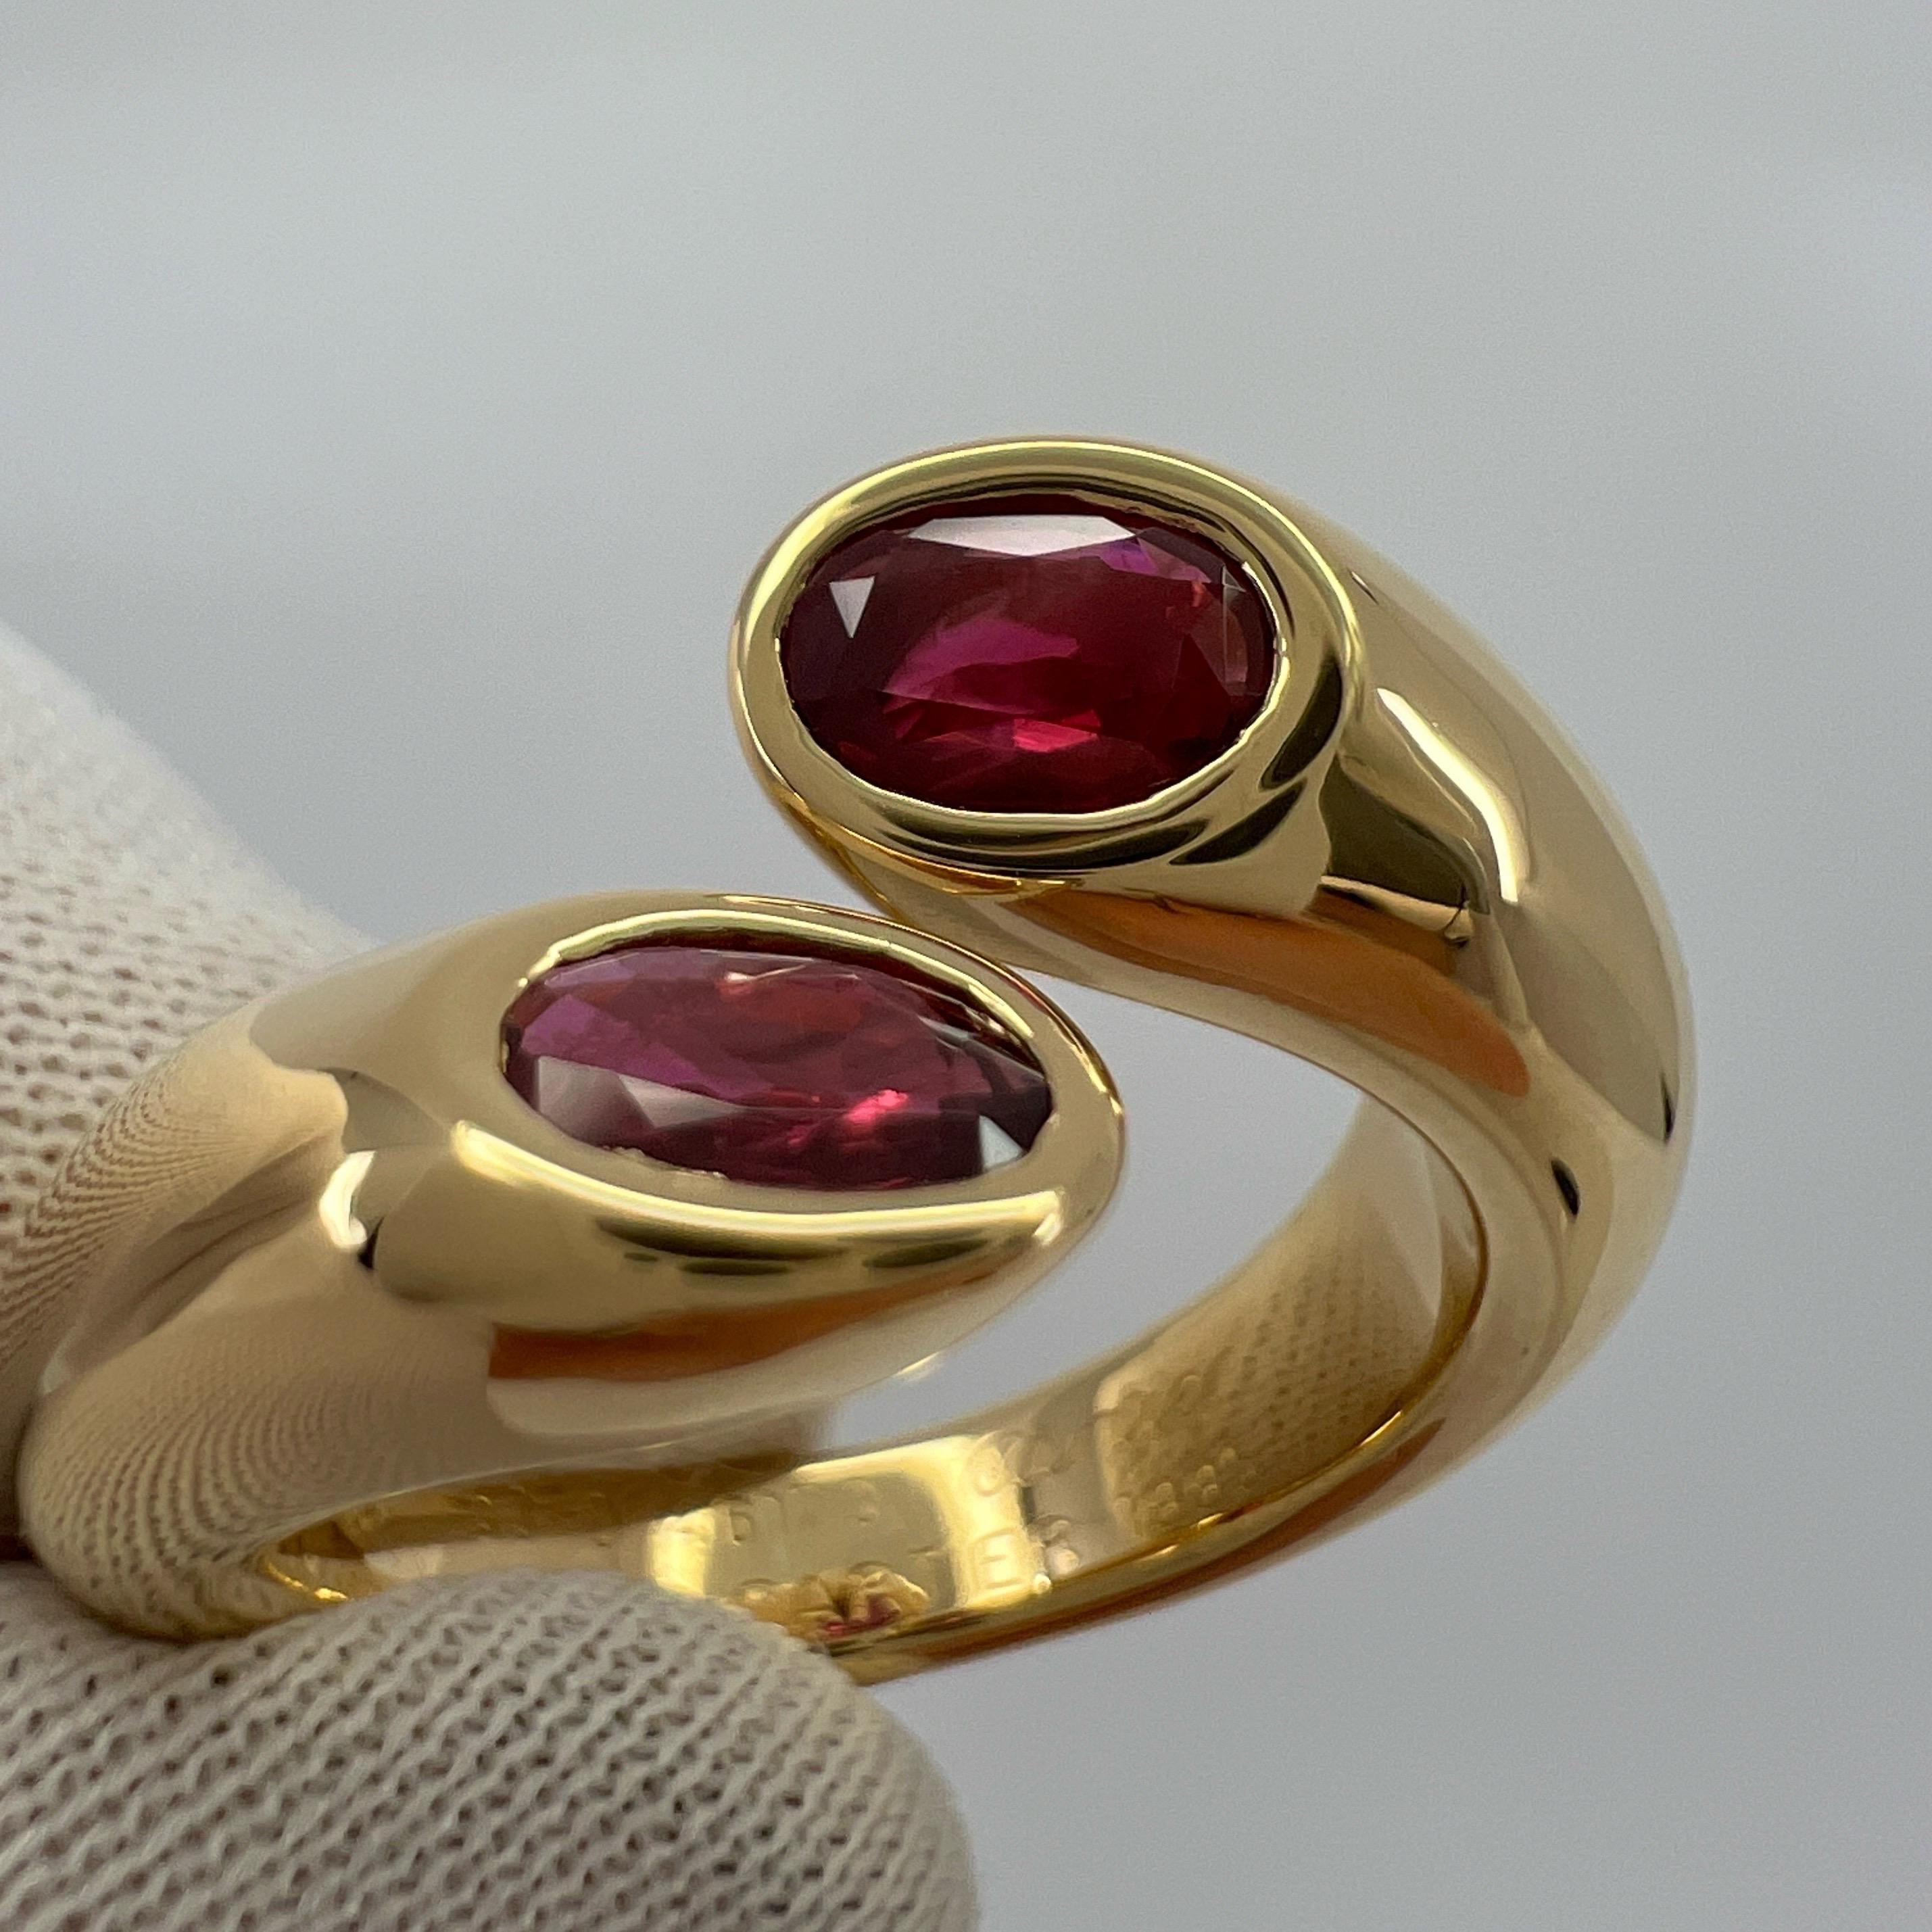 Rare Vintage Cartier Red Ruby Ellipse Oval Cut 18k Gold Bypass Split Ring 6.5 52 6